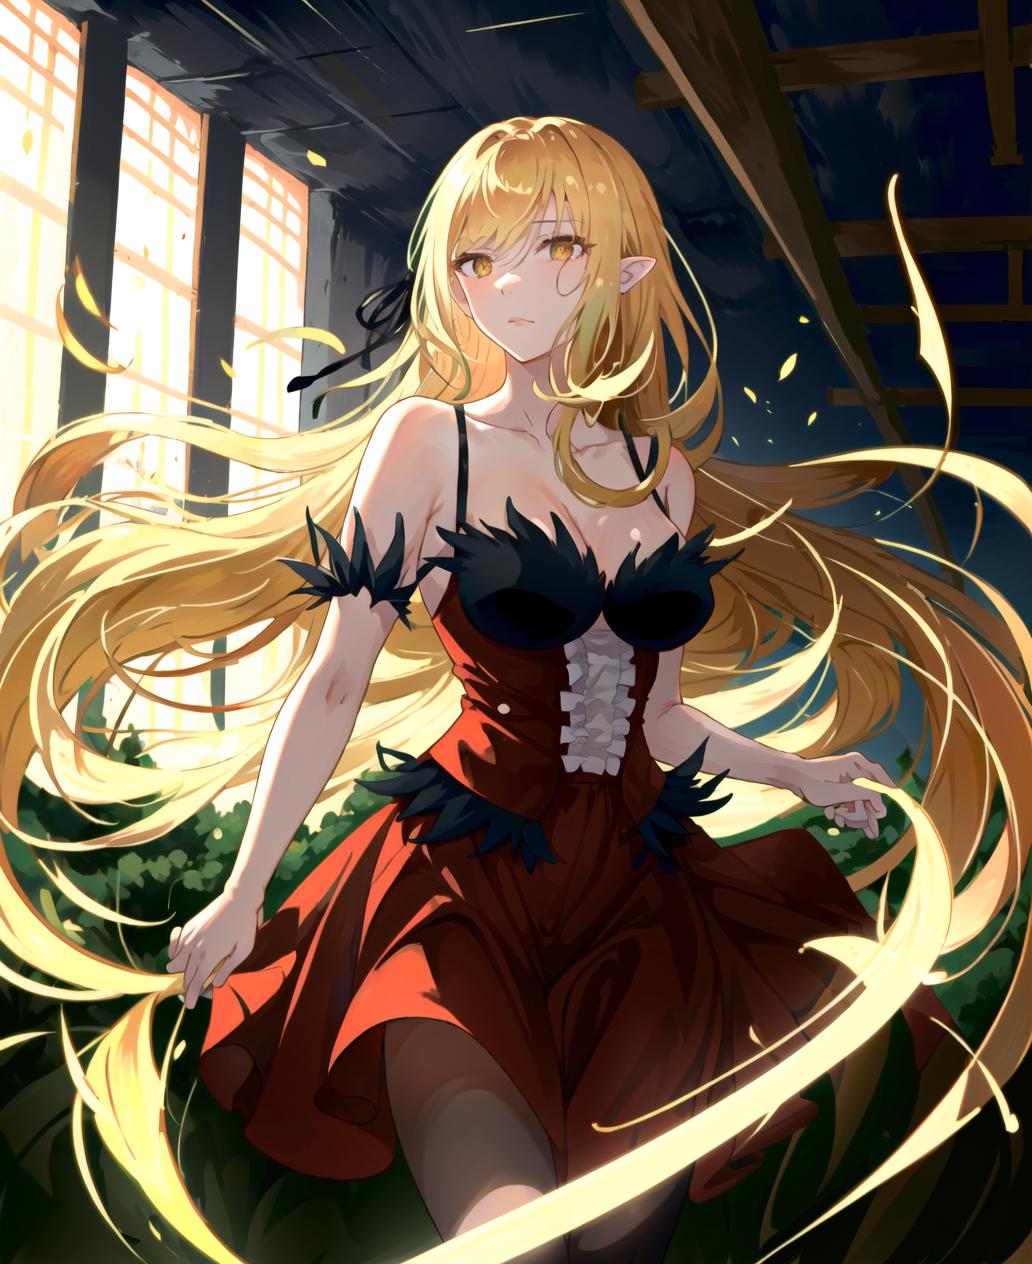 kiss-shot acerola-orion heart-under-blade image by rius